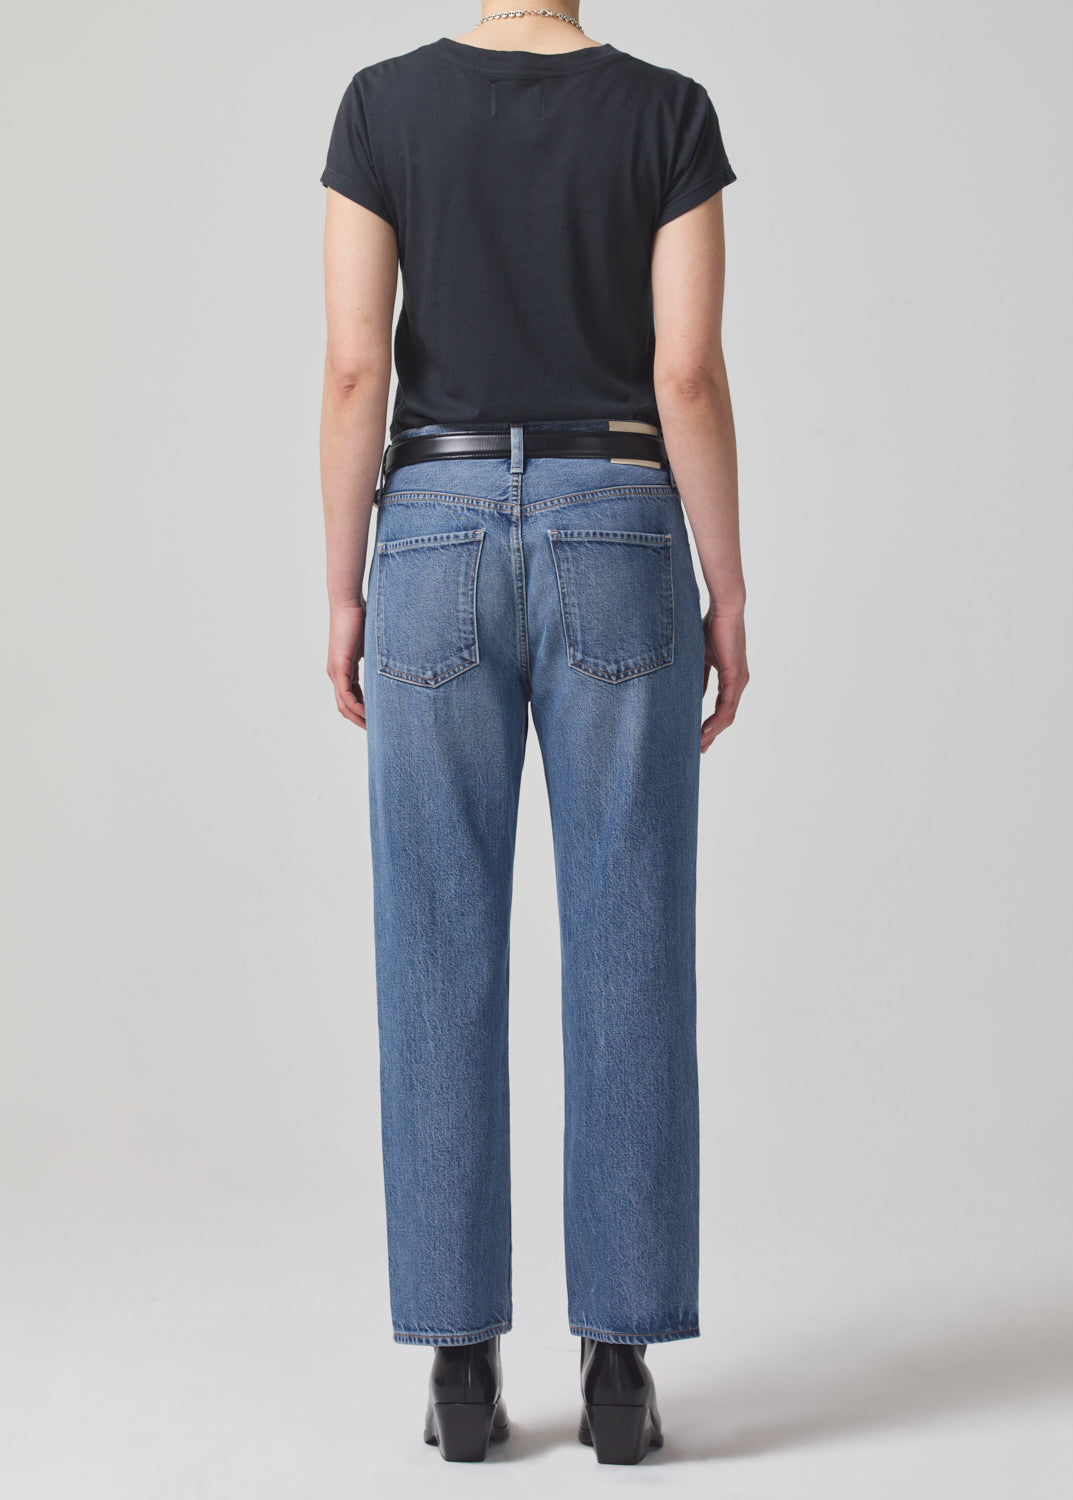 Emery Crop Relaxed Straight Jean in Siesta back